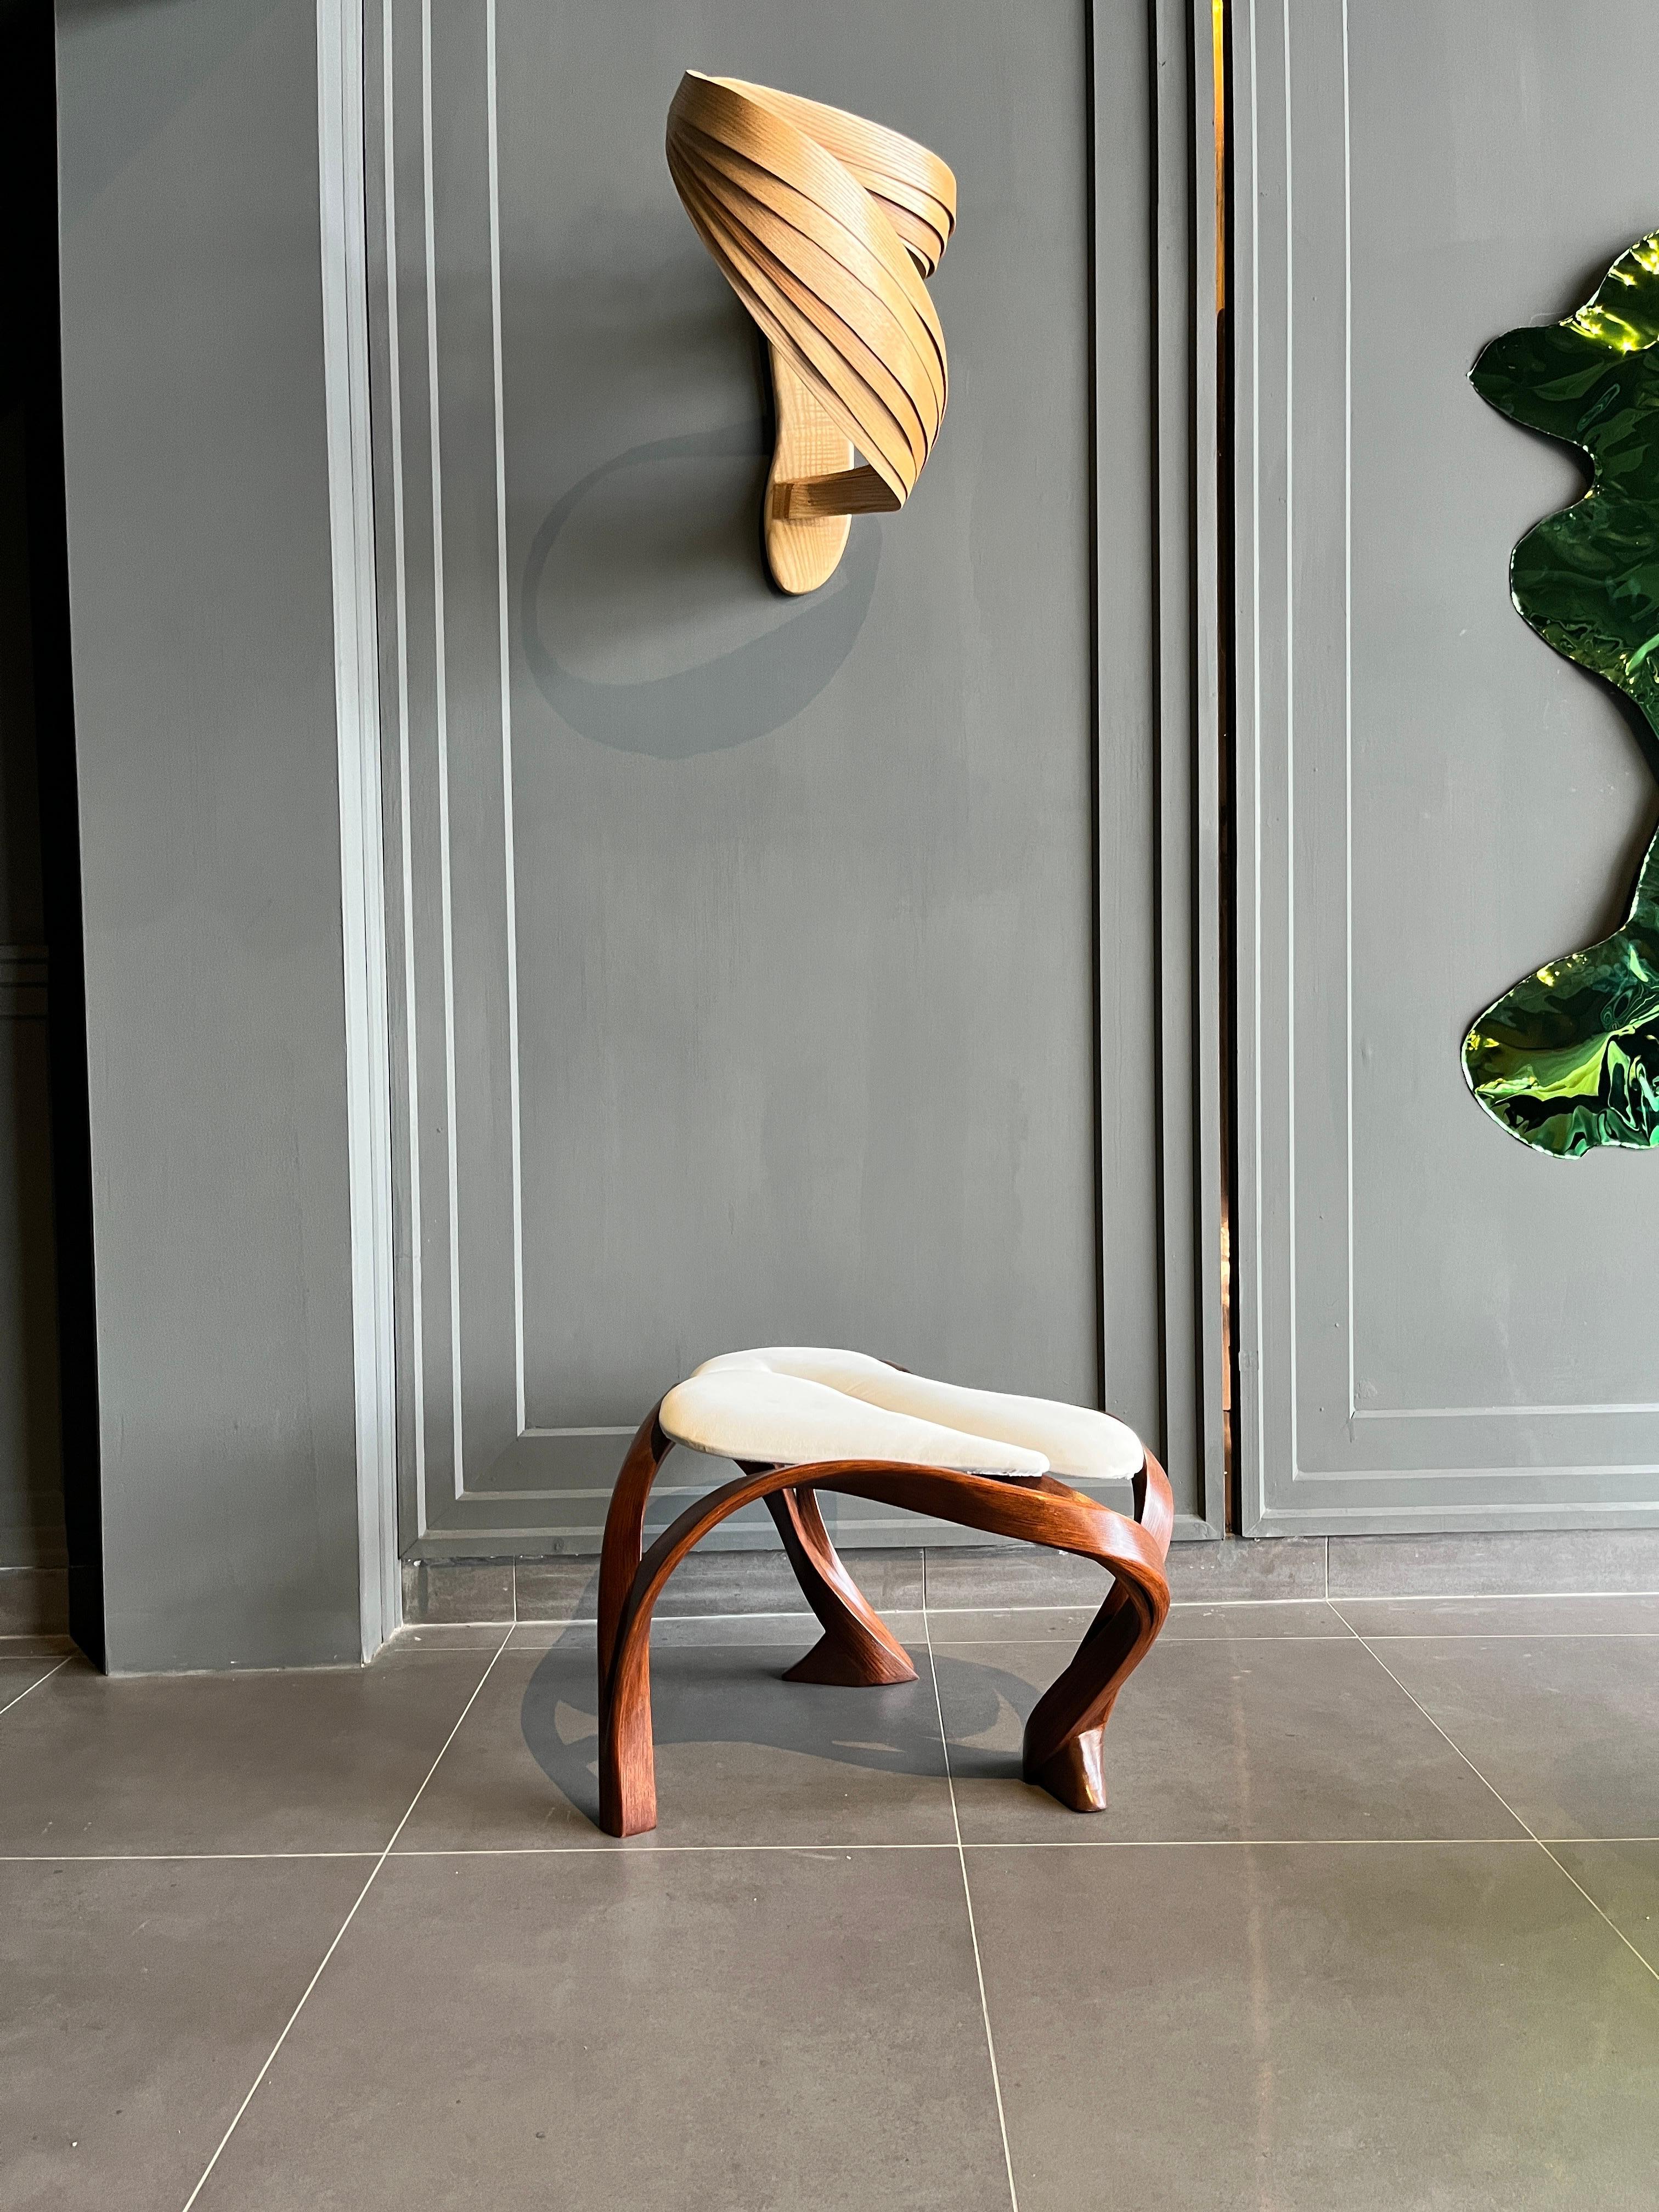 The stool has a free form design that makes it asymmetrical from all angles. The upholstery has been divided in two sections which allows the fluid frame to flow through the upholstery and also form three legs of the piece. 

Our pieces are based